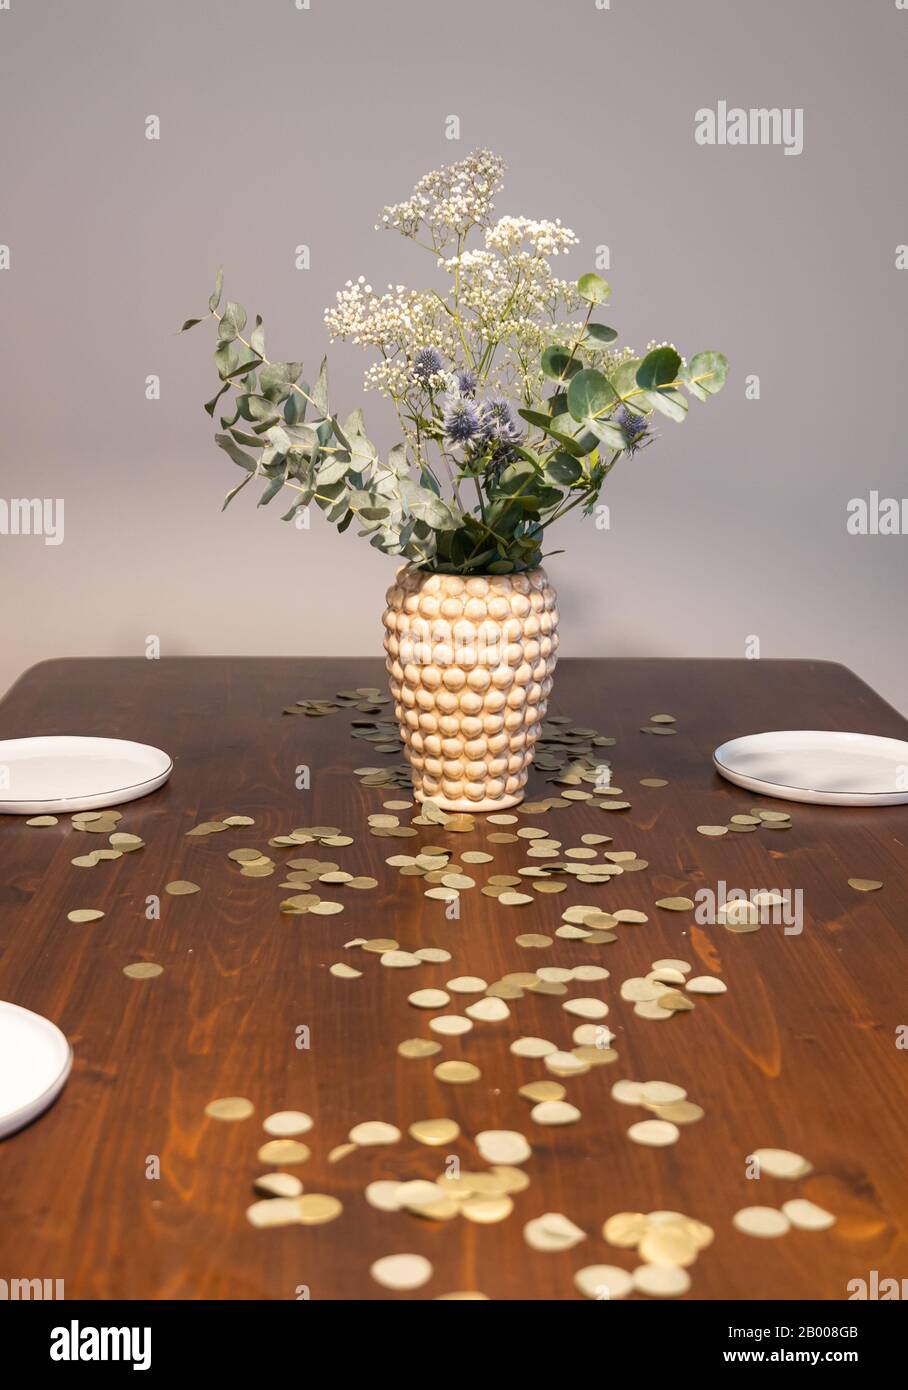 Vase with a bouquet of white and blue flowers on a wooden table before a grey background. golden confetti lying on the table. Stock Photo